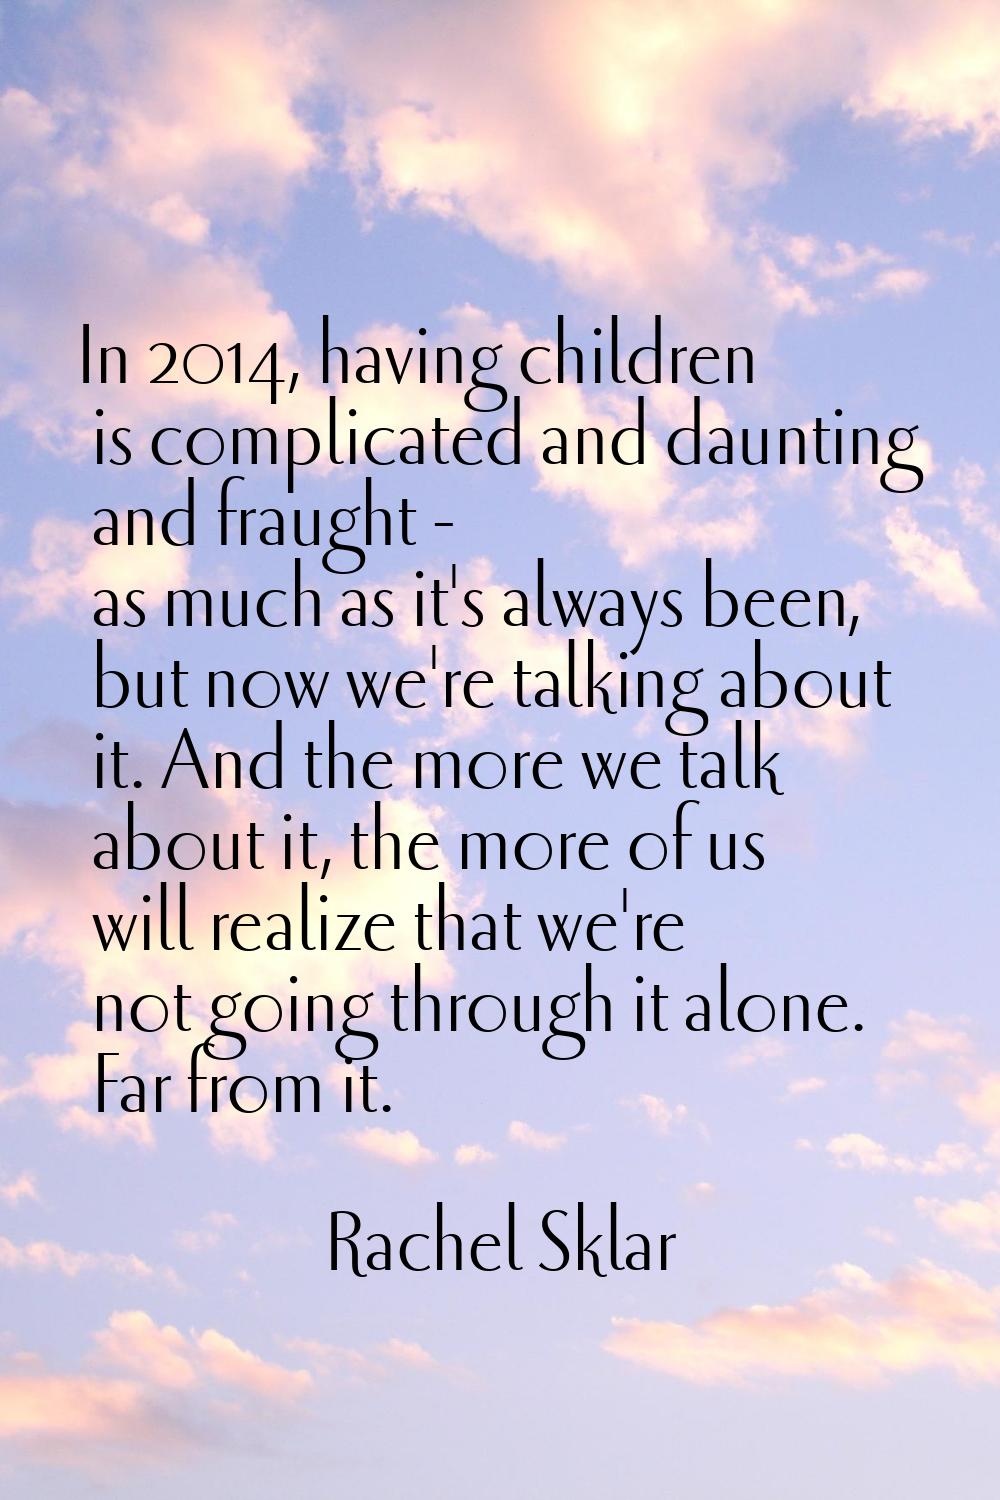 In 2014, having children is complicated and daunting and fraught - as much as it's always been, but